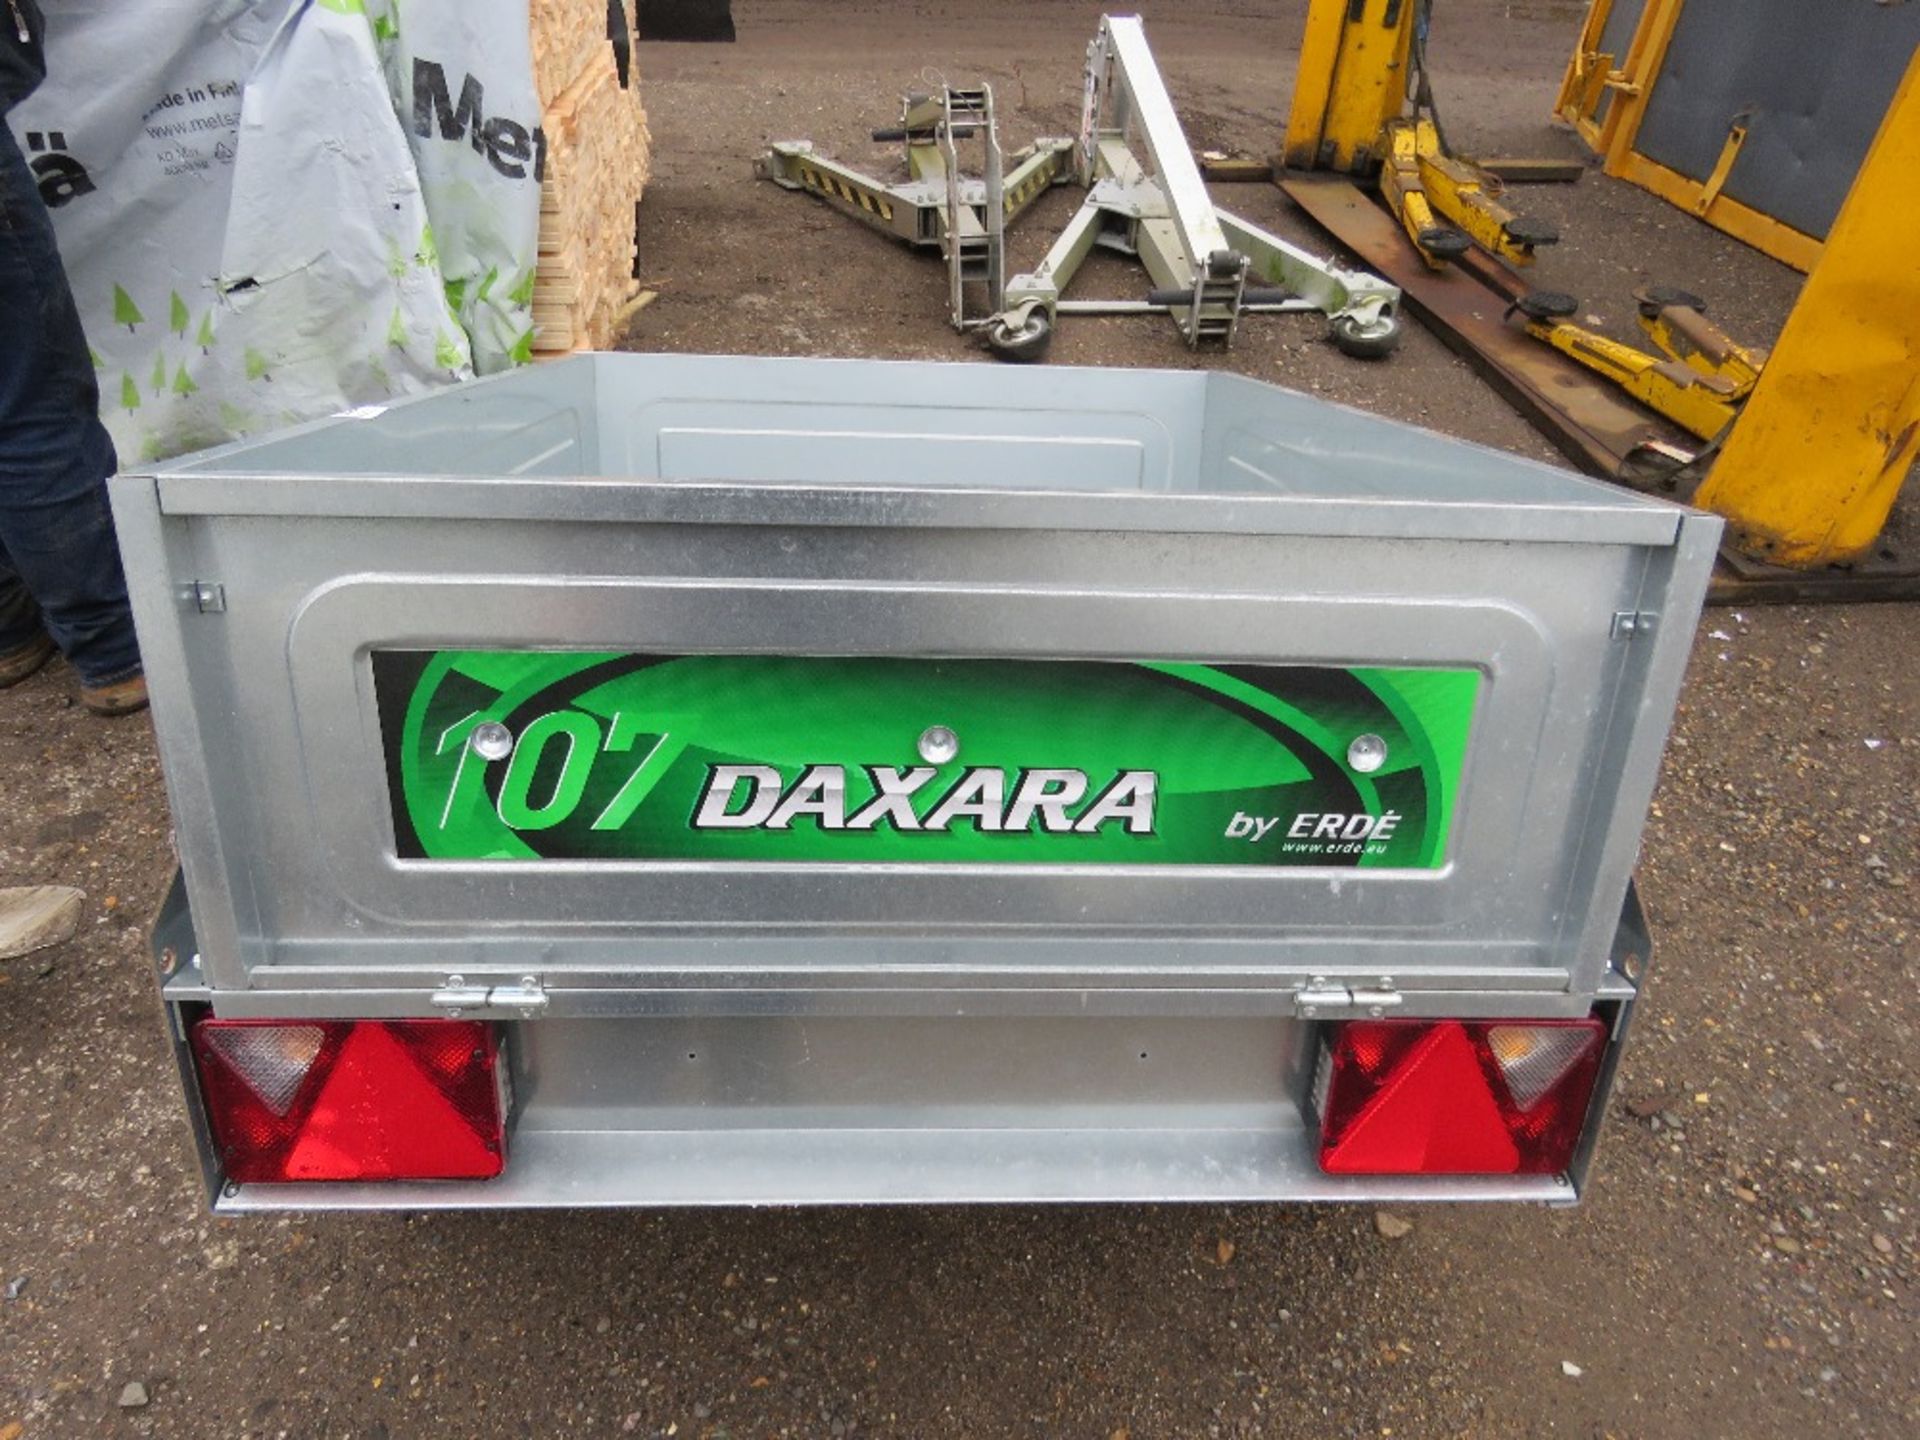 DAXARA 107 CAMPING TRAILER, UNUSED WITH COVER. - Image 2 of 7